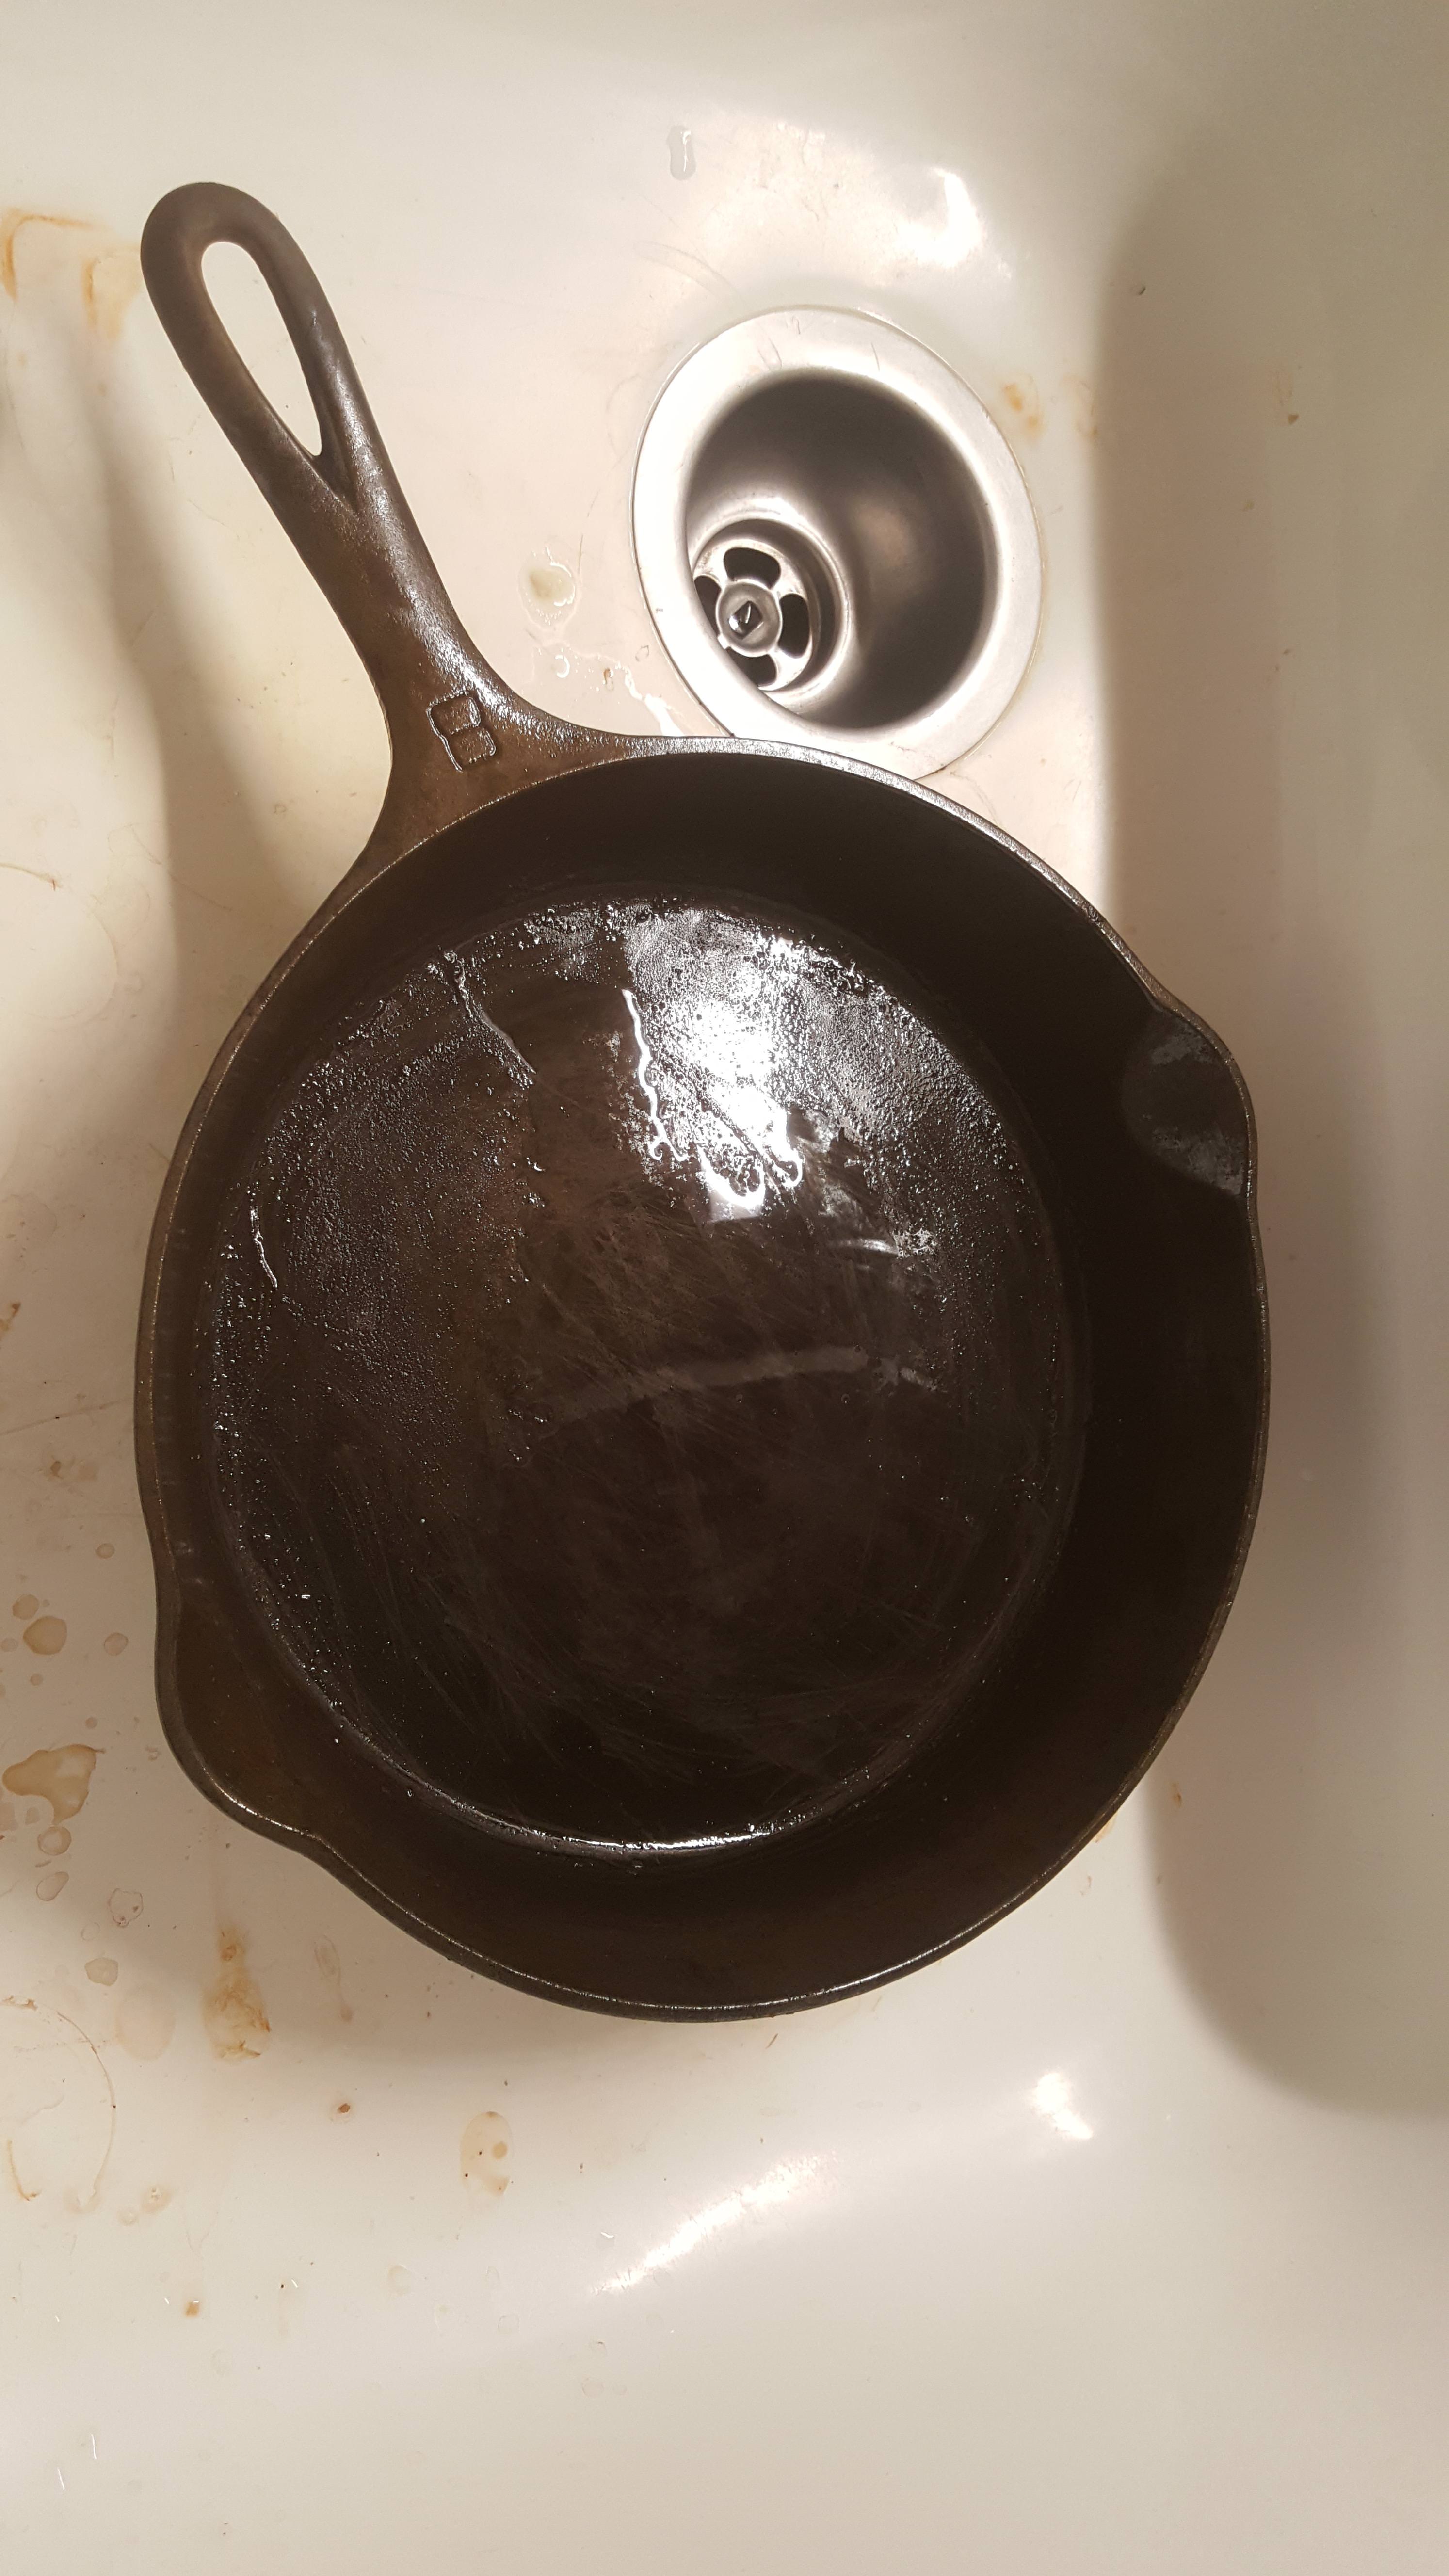 Cast iron cleaning